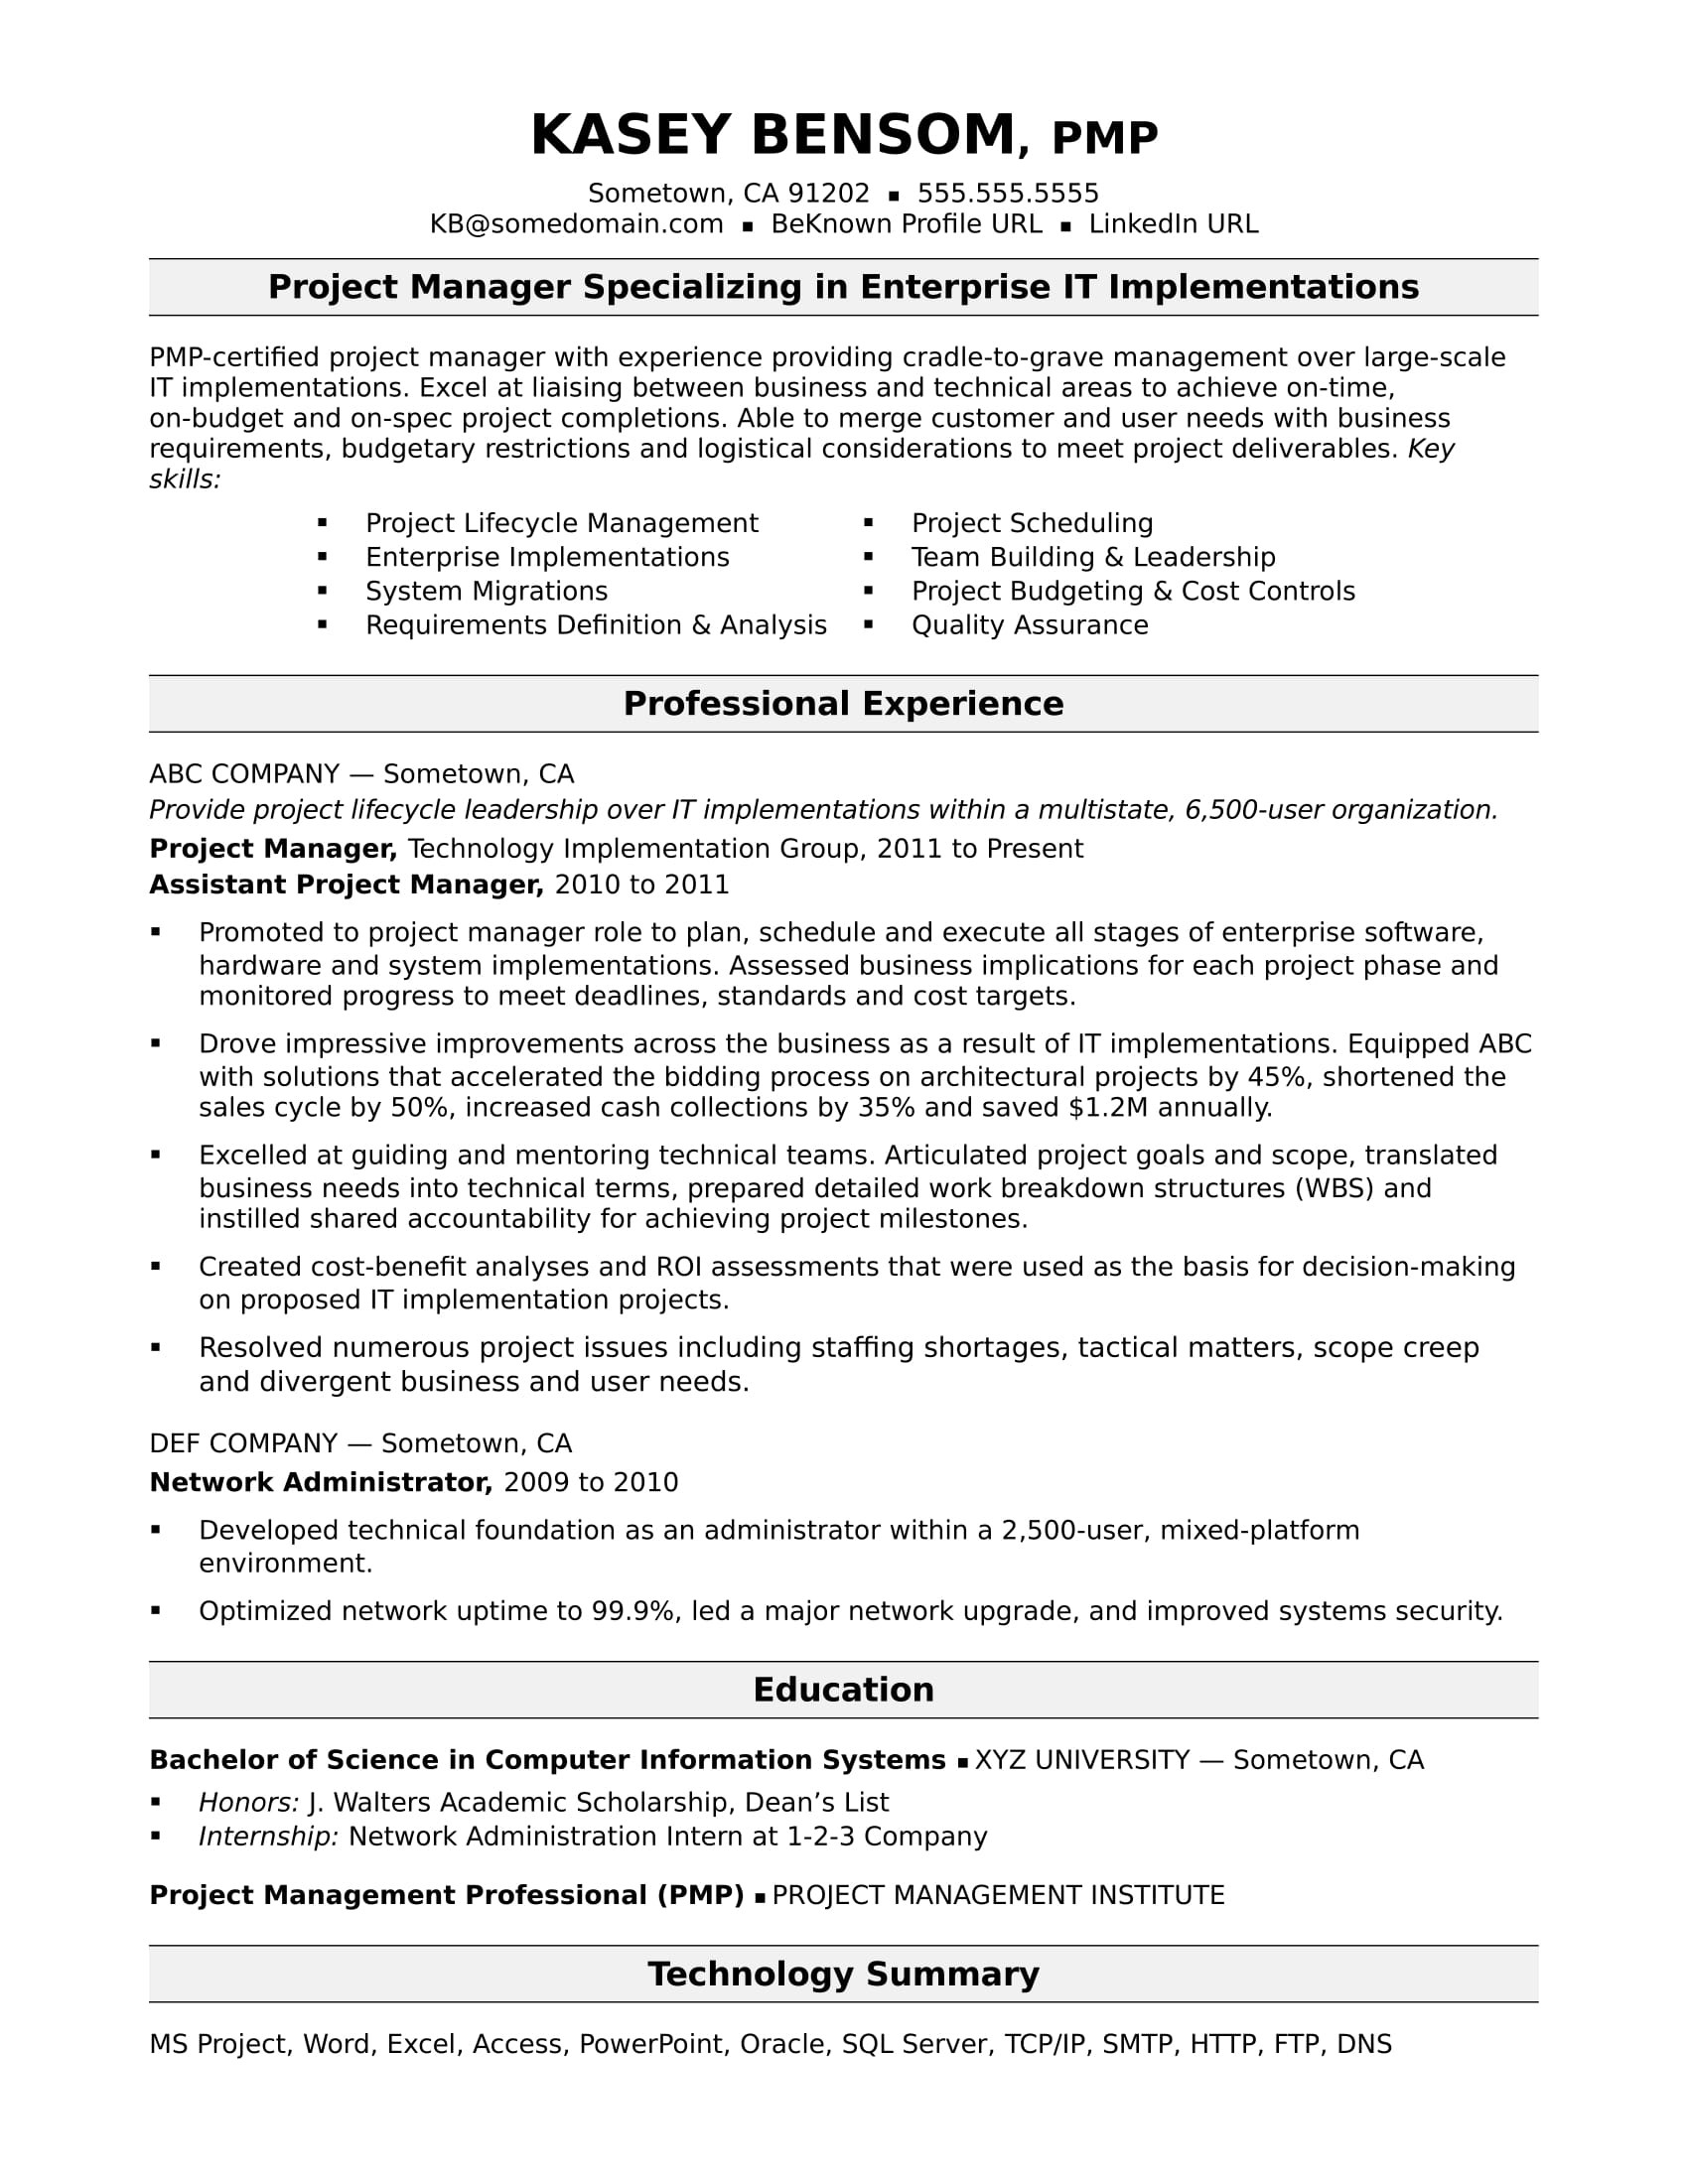 Sample Resume for Project Manager assistant Midlevel It Project Manager Resume Monster.com